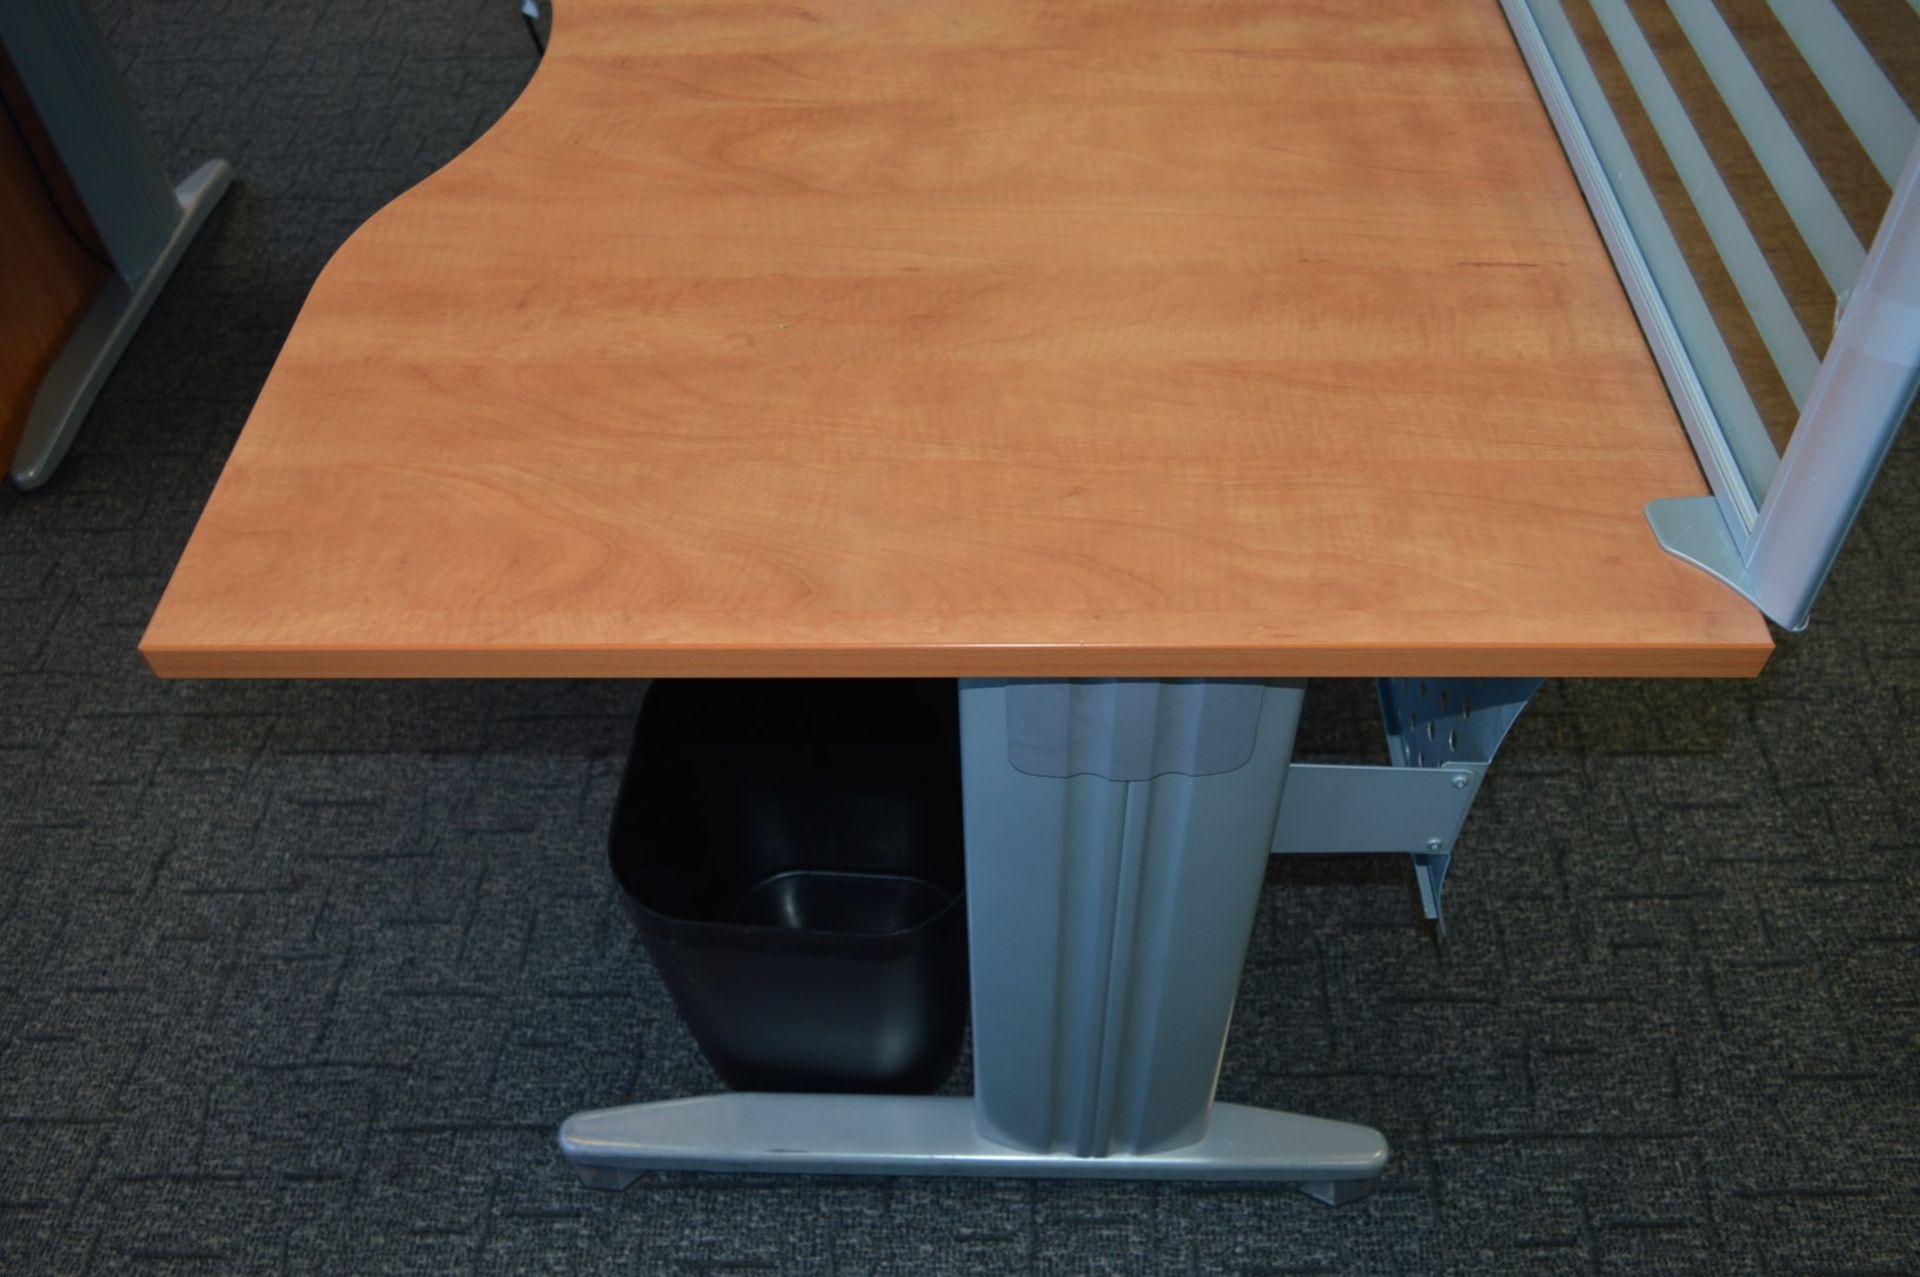 4 x Ergonomical Corner Office Desks With a Beech Finish, Cantilever Grey Coated Base, Cable Tidy - Image 6 of 18